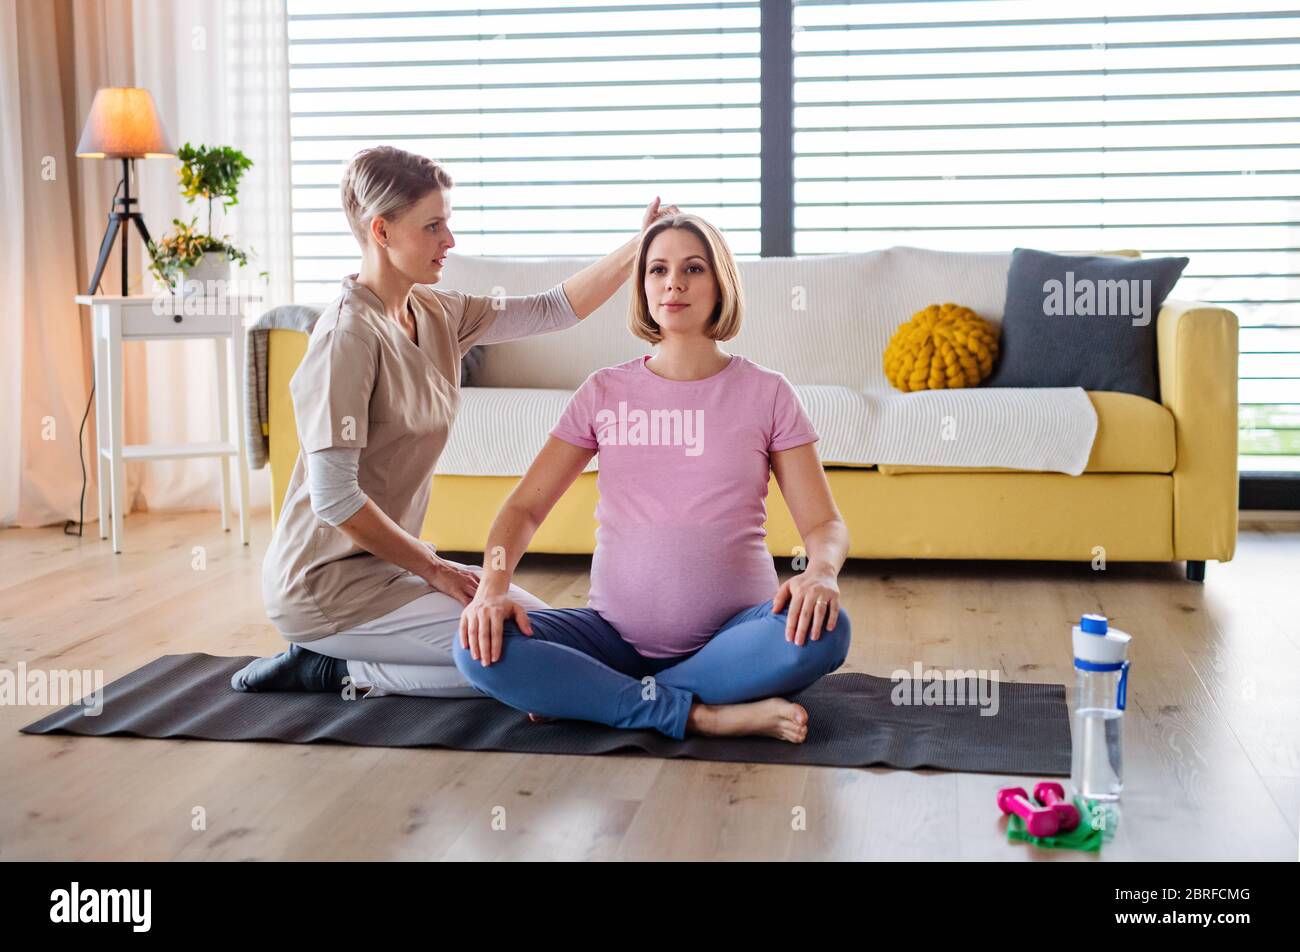 Pregnant woman doing yoga exercise with instructor at home. Stock Photo